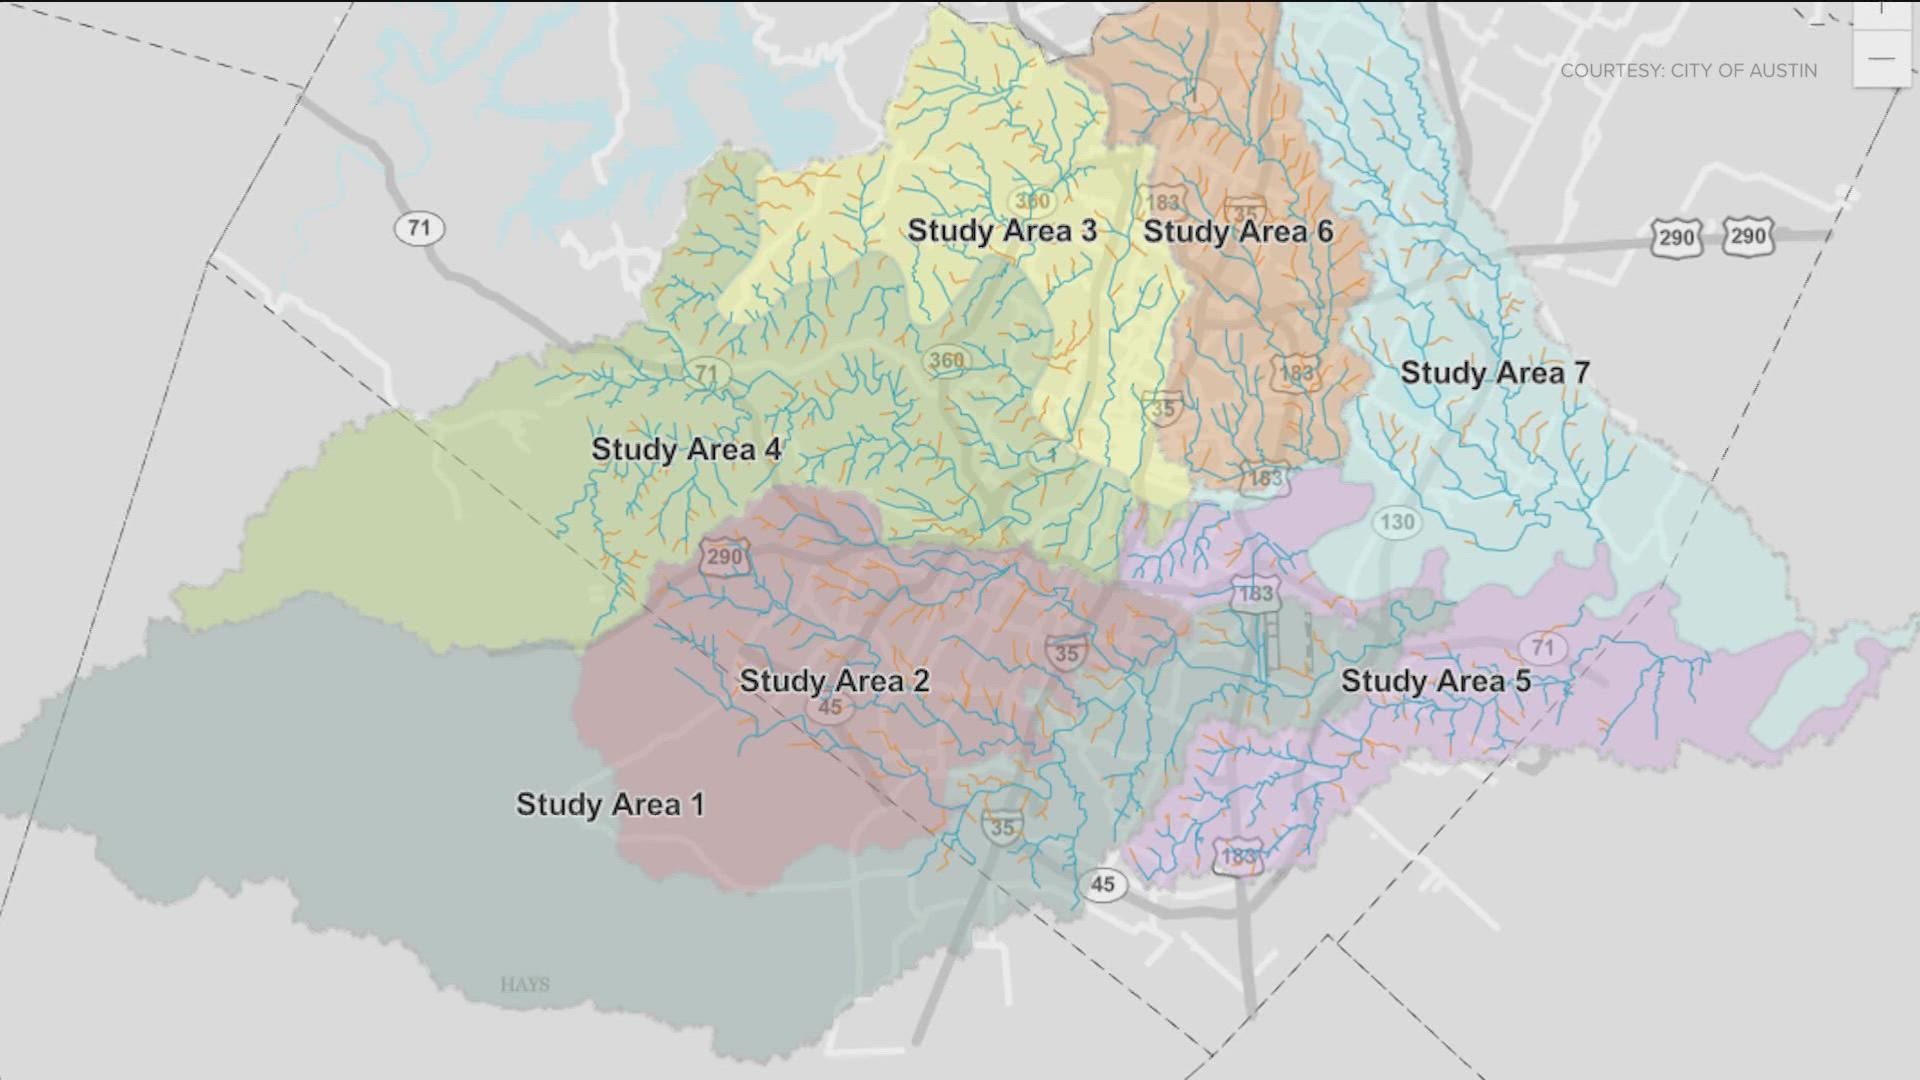 About 10% of the land in Austin is in a floodplain that shifts over time due to development.